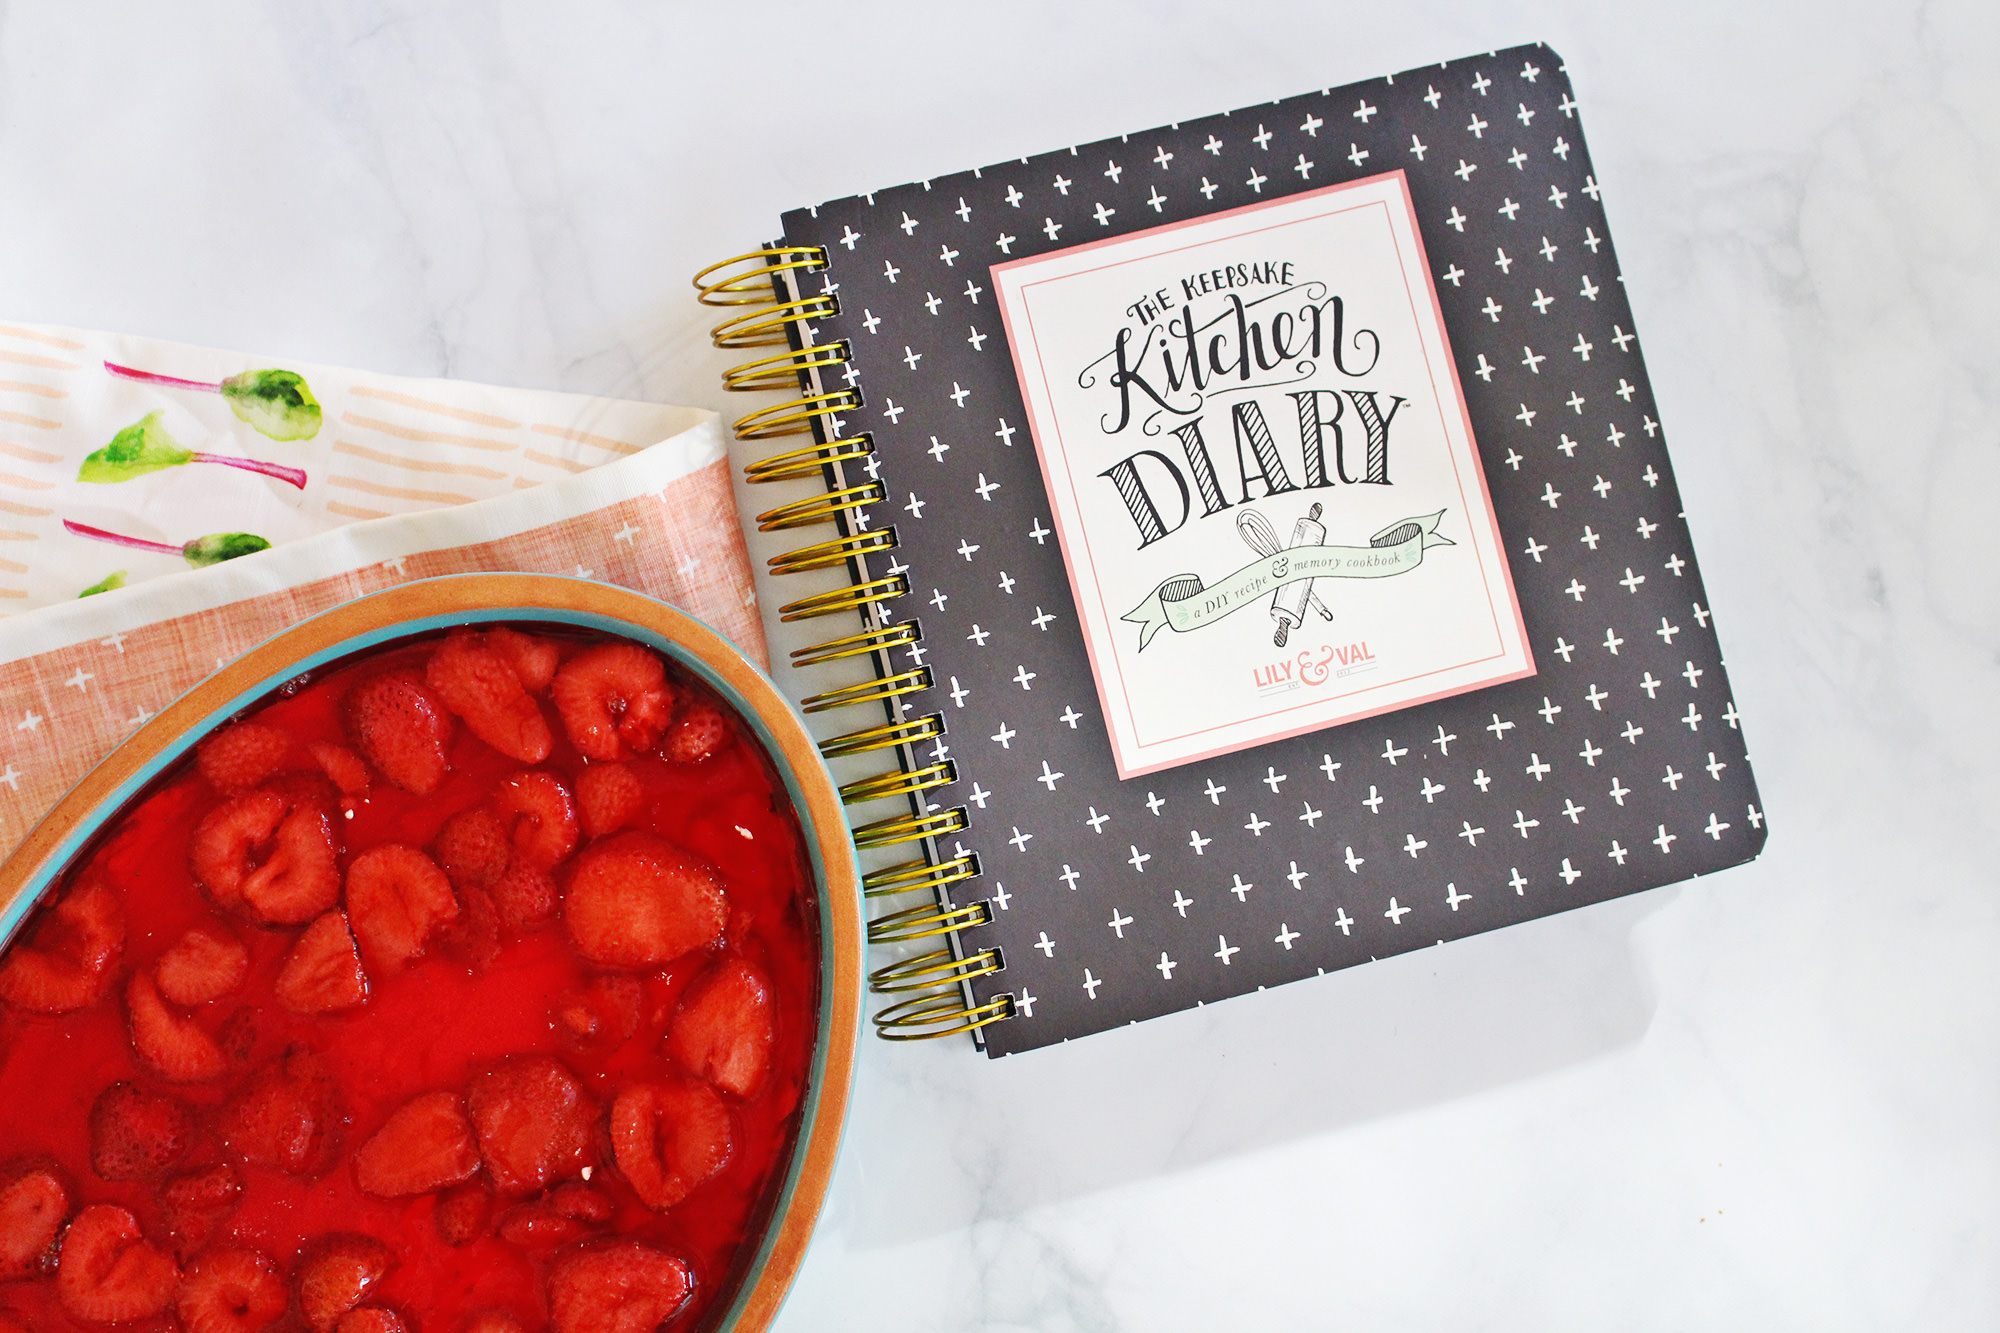 The Keepsake Kitchen Diary is perfect for recording special family recipes like this Strawberry Pretzel Dessert